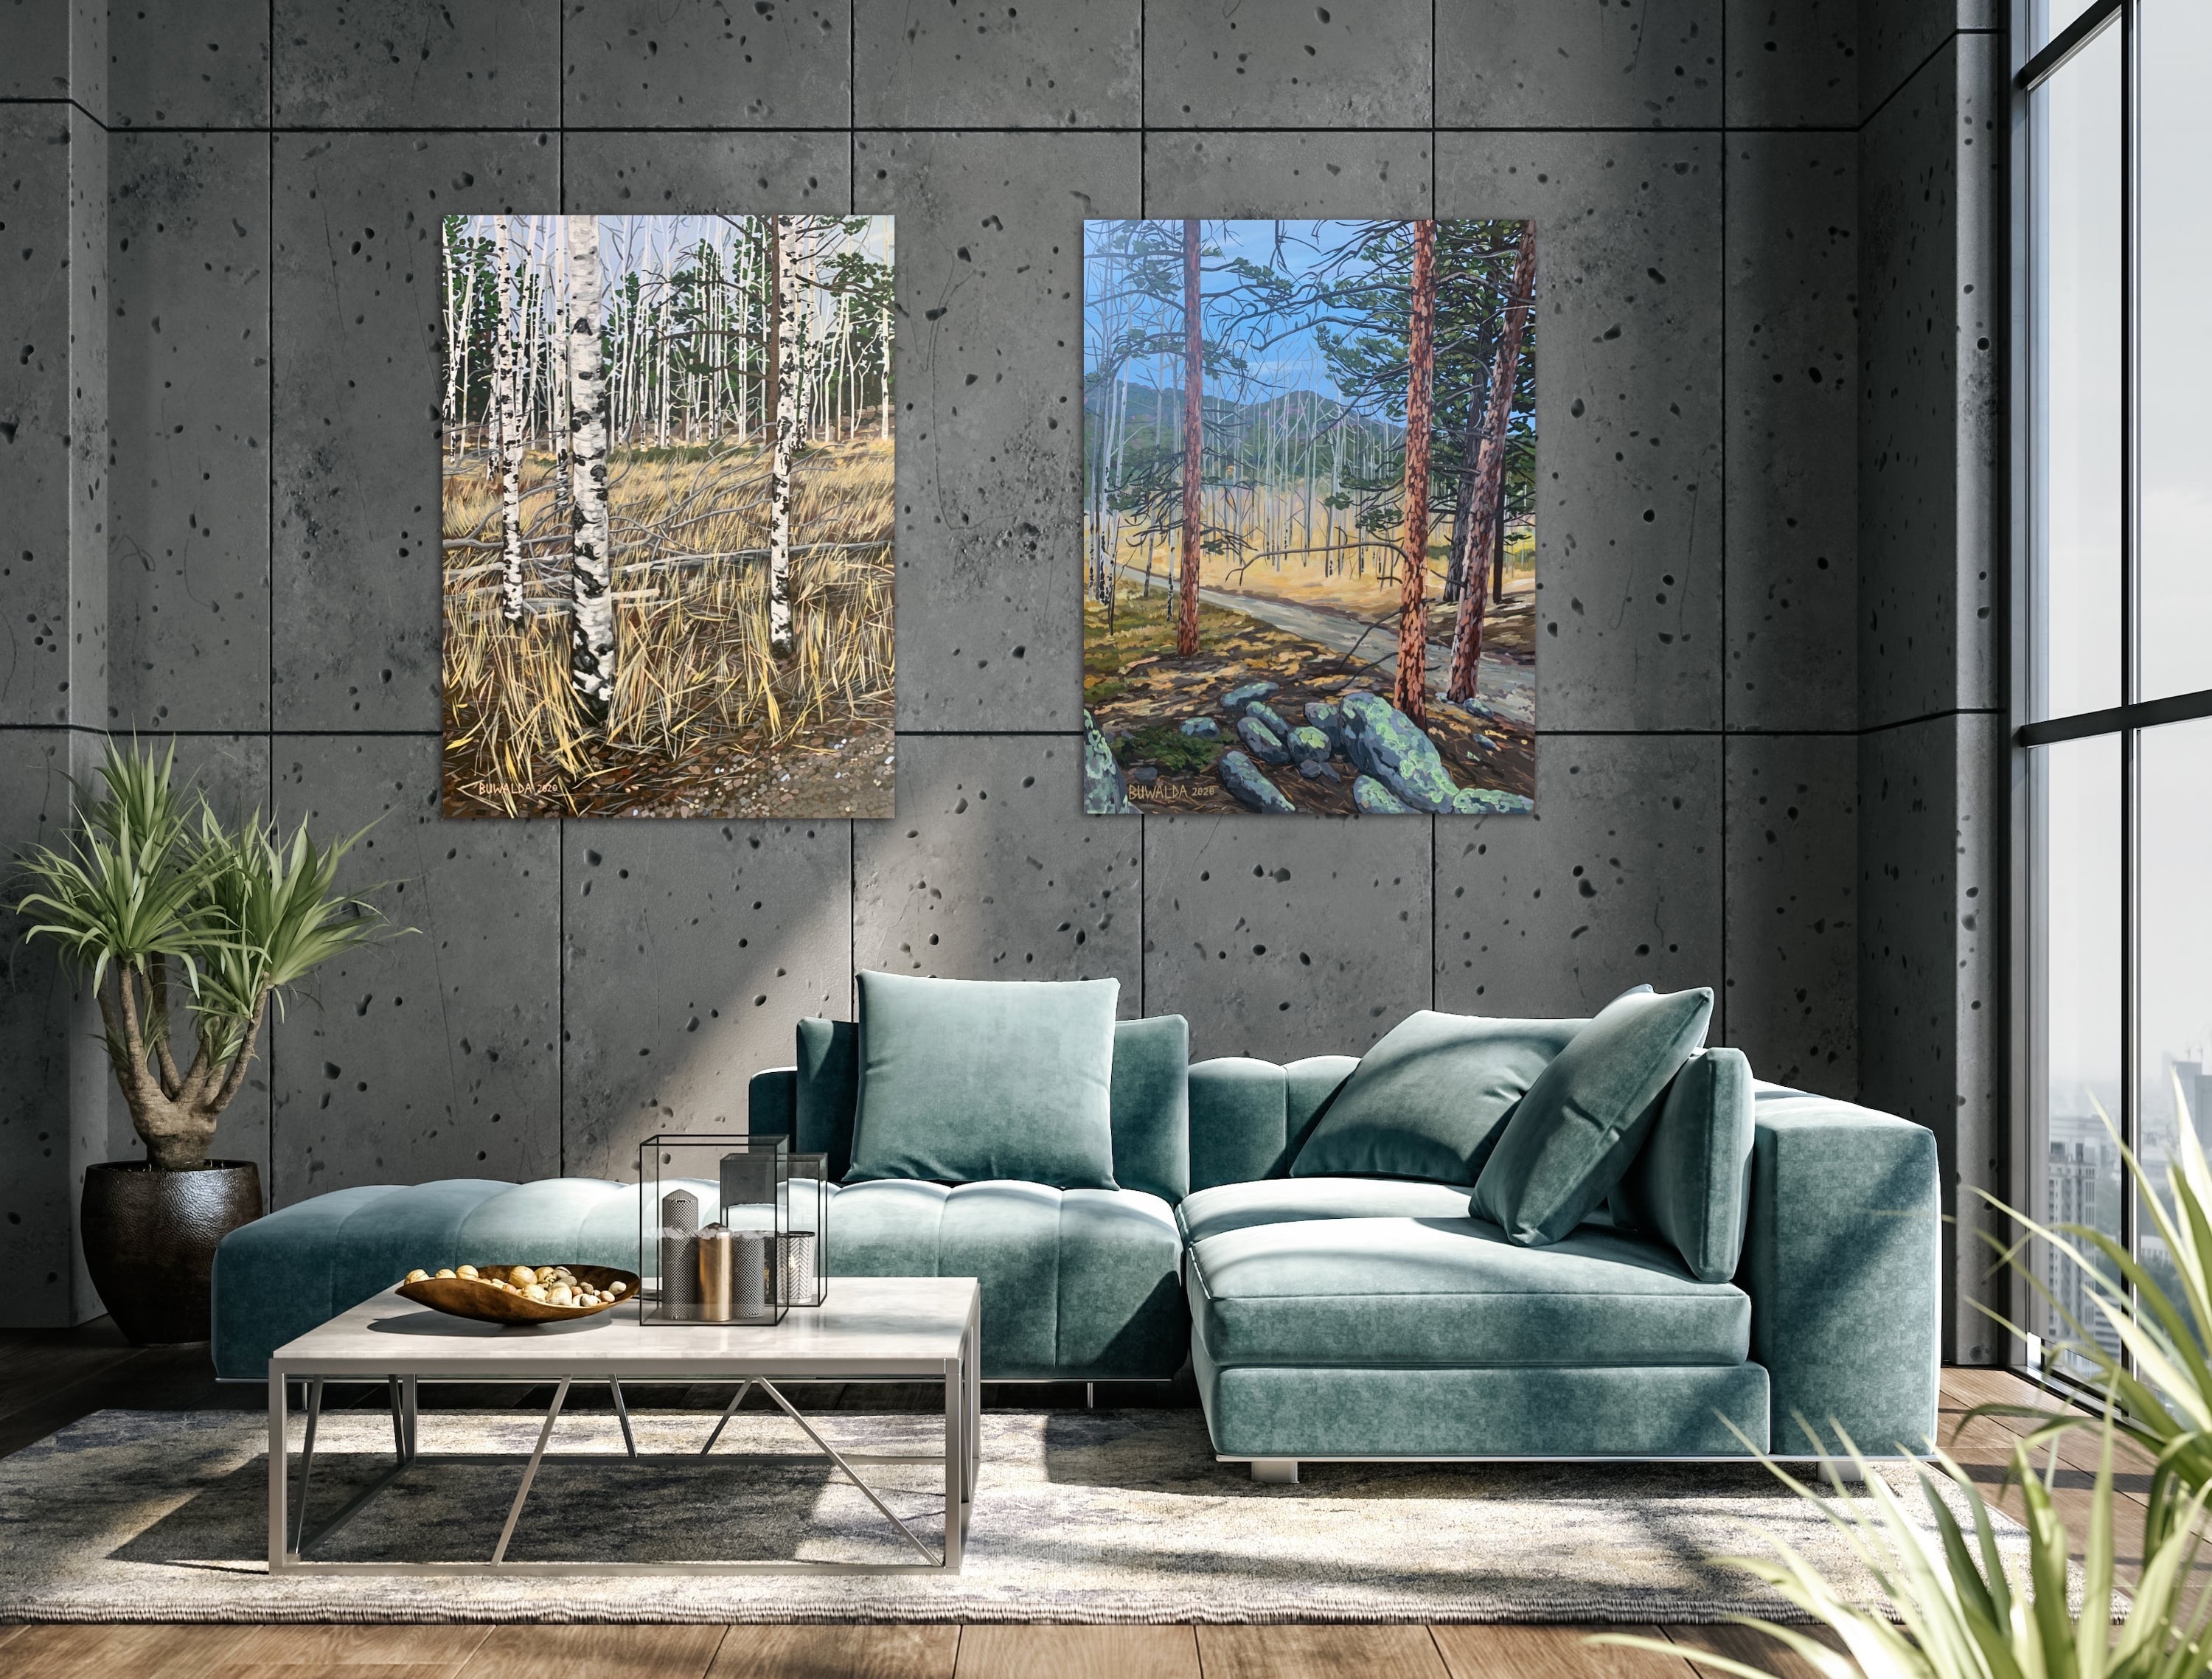 Original Diptych Acrylic on Canvas "January Aspens" and "January Pines" BFAS Private Collection